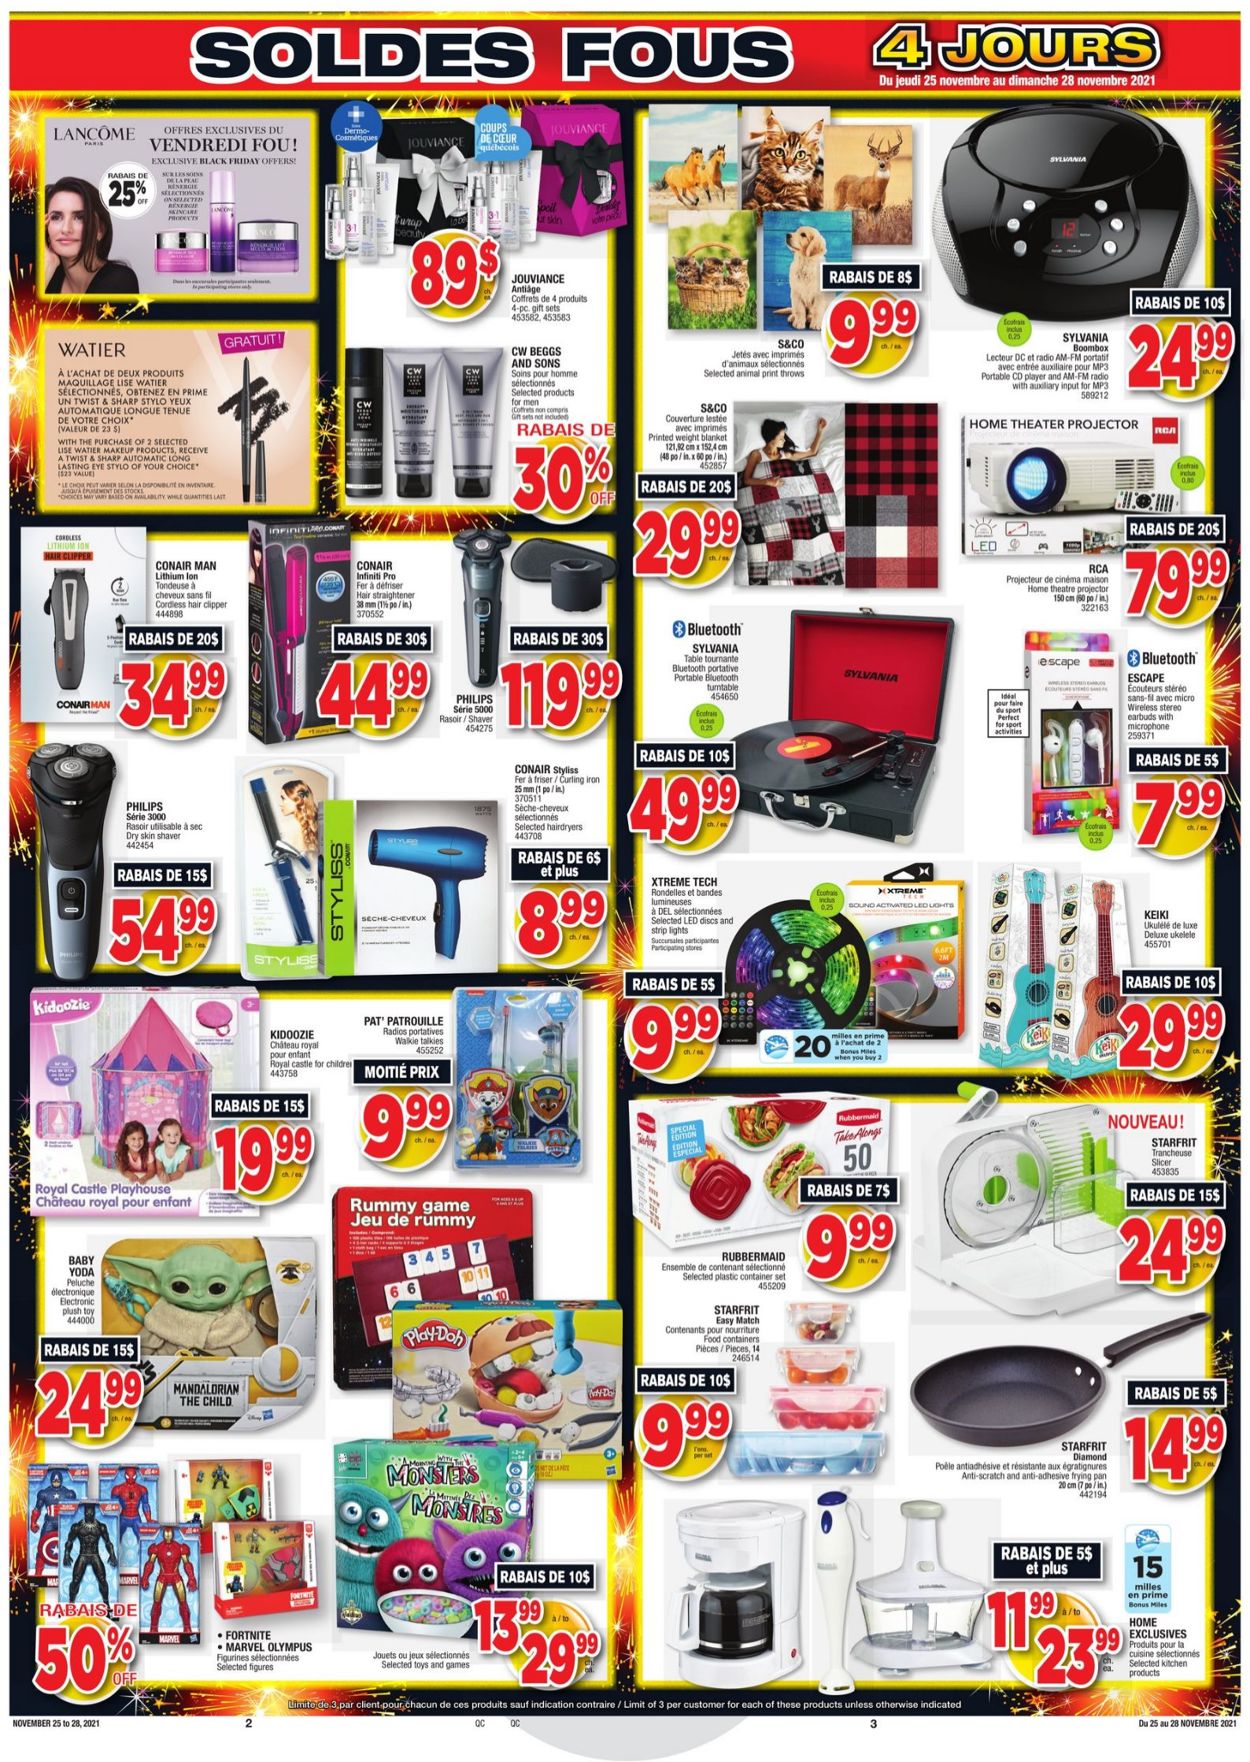 Jean Coutu BLACK FRIDAY 2021 Flyer - 11/25-12/01/2021 (Page 2)